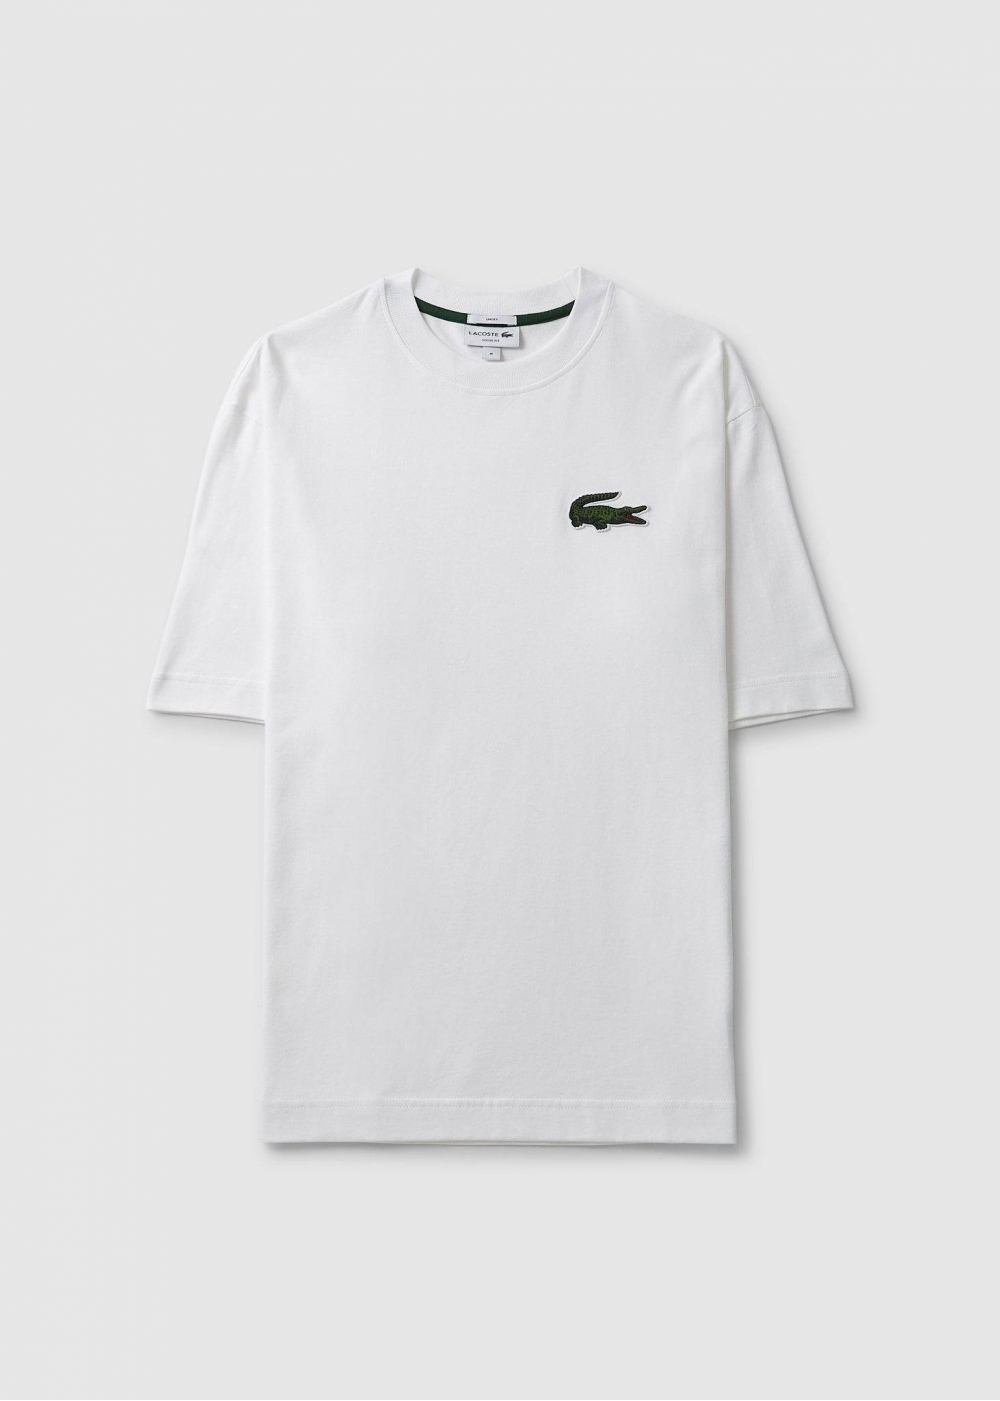 Lacoste Mens Robert George Croc Oversized T-shirt In White